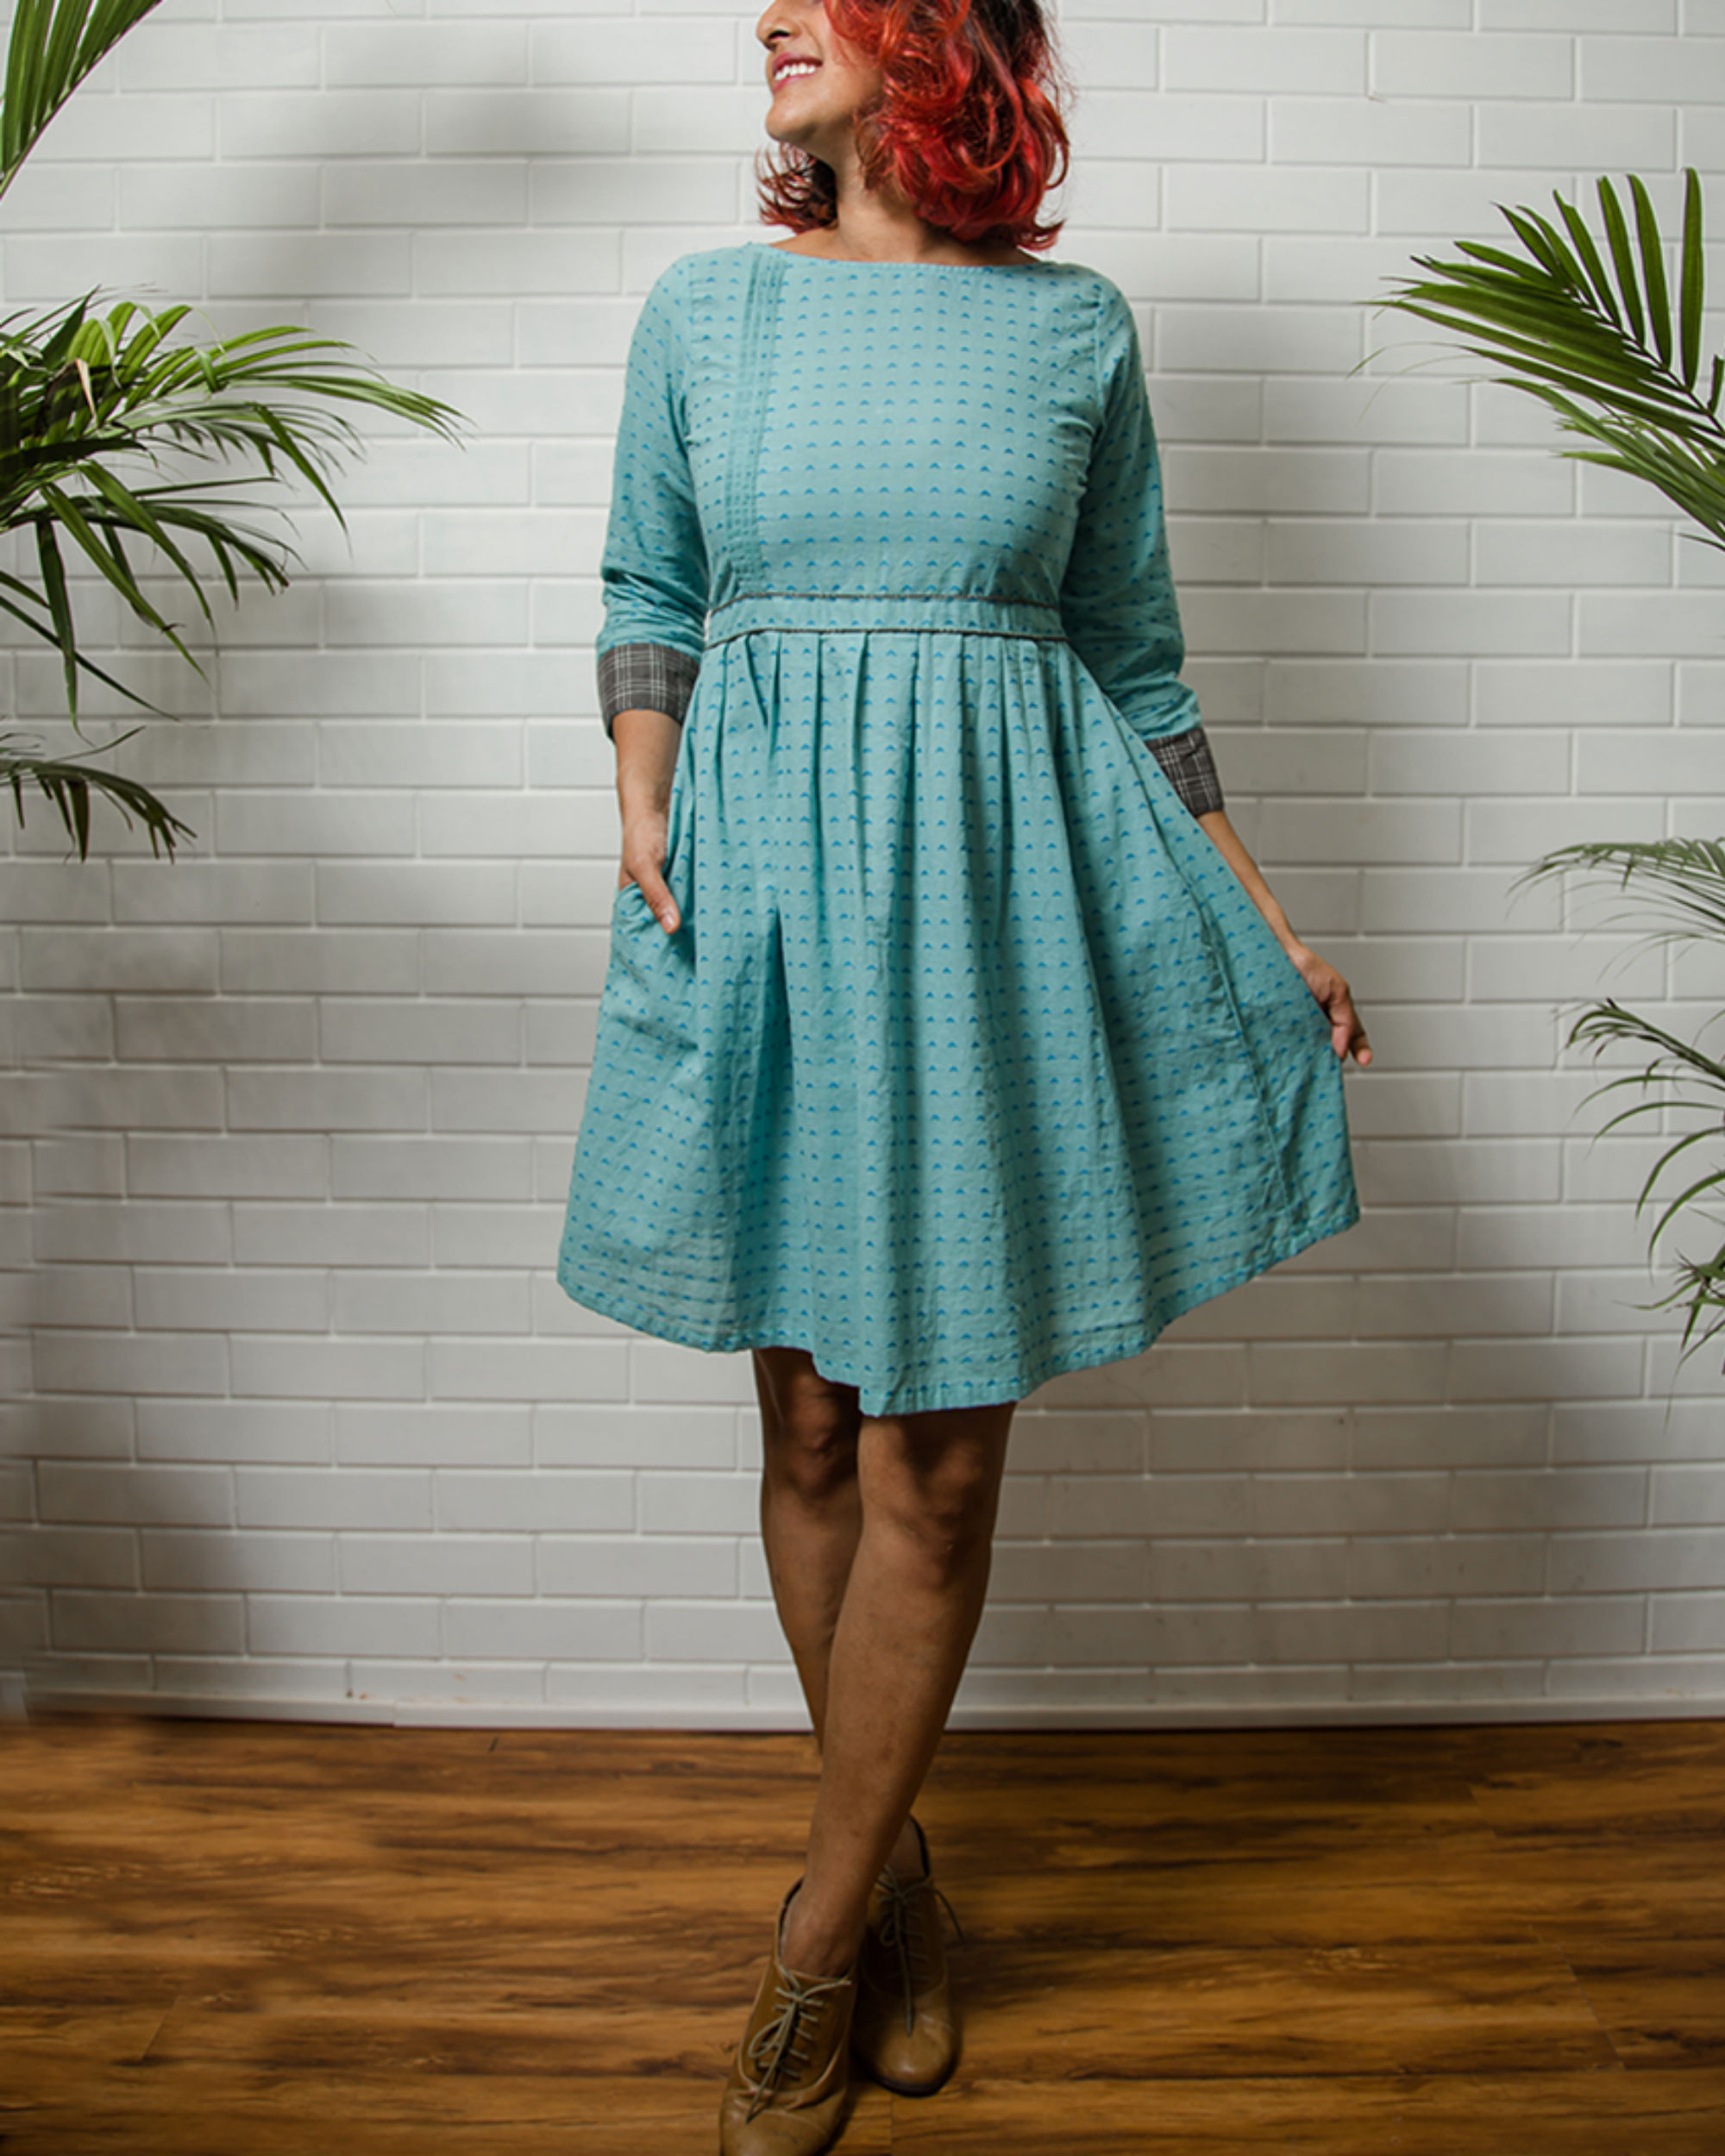 Blue checkered dress by Why So Blue | The Secret Label